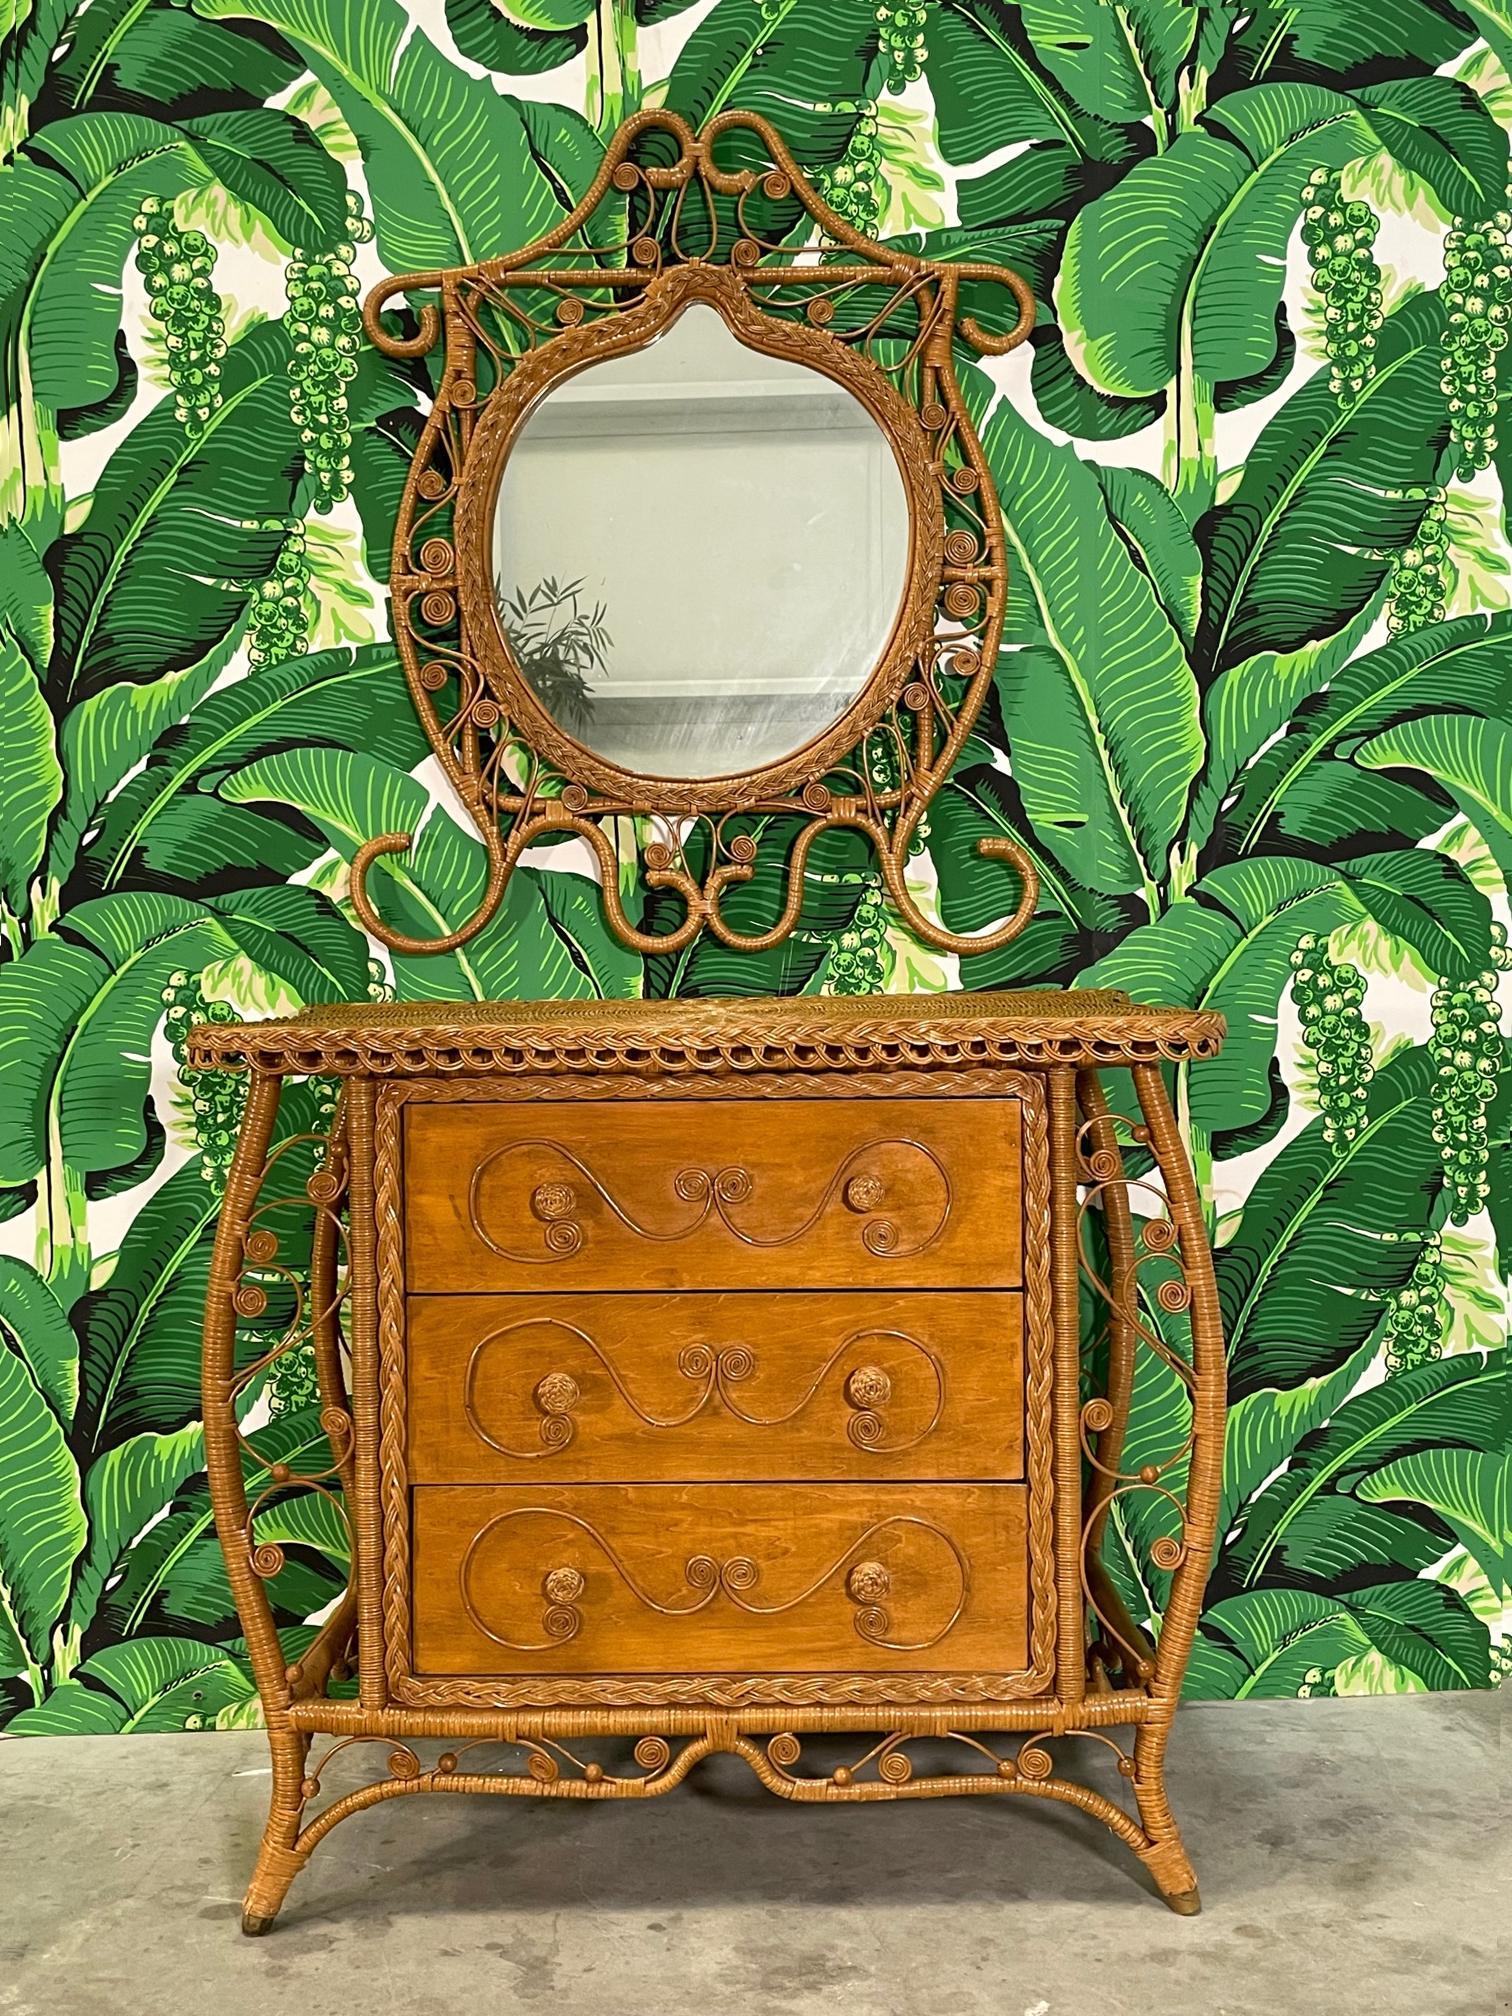 Vintage triple dresser features wicker veneer and detailing in the Fiddlehead style. Matching mirror included. Dresser measures 39.5